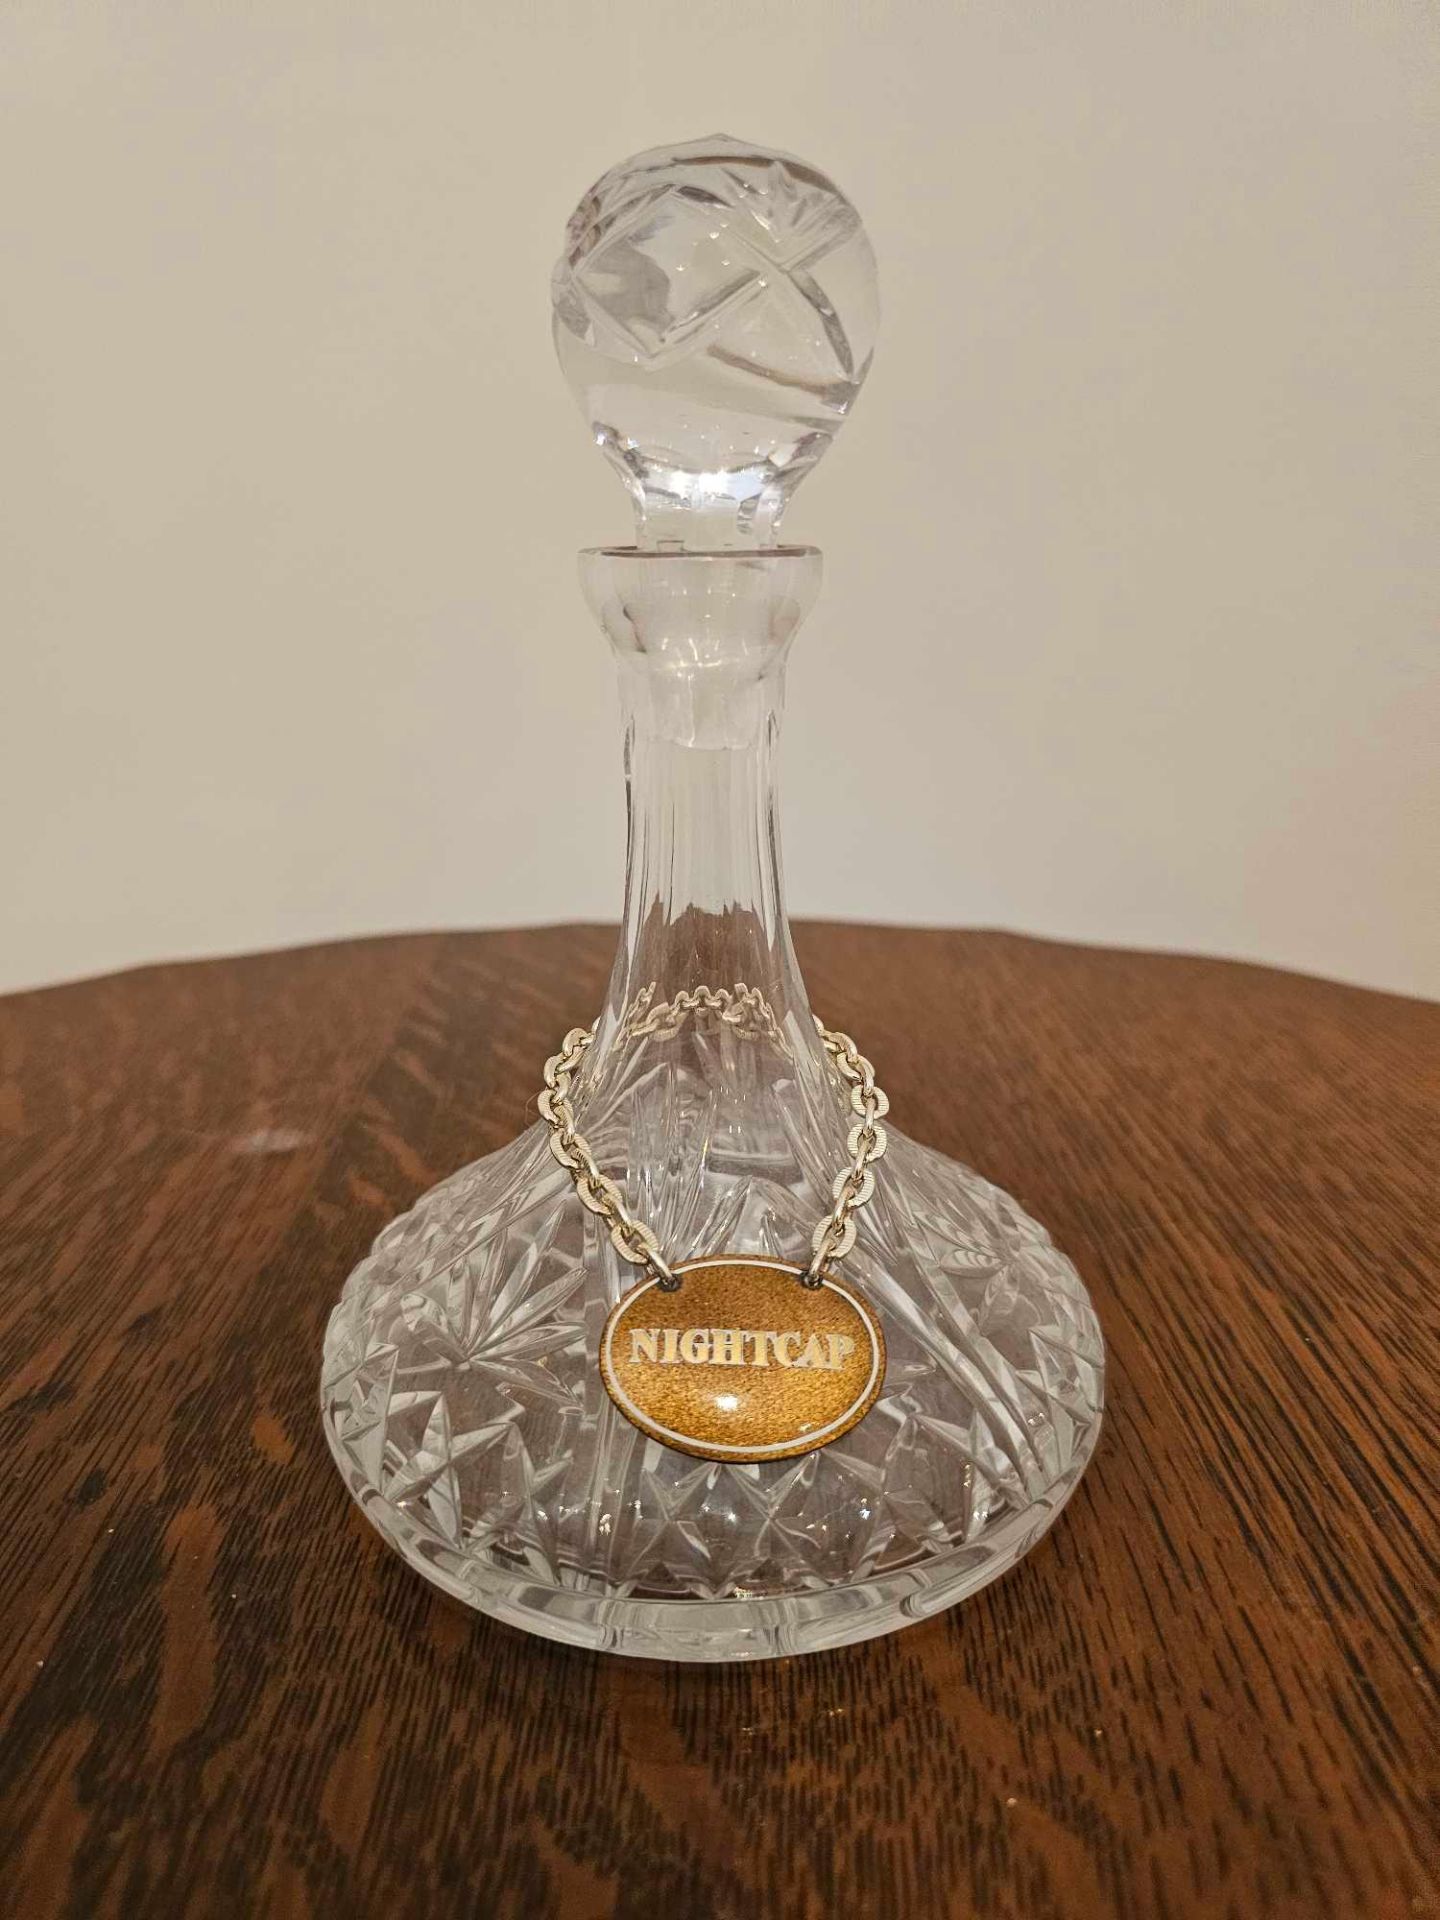 A Small Ship Style Crystal Decanter With Nightcap Plaque 17cm